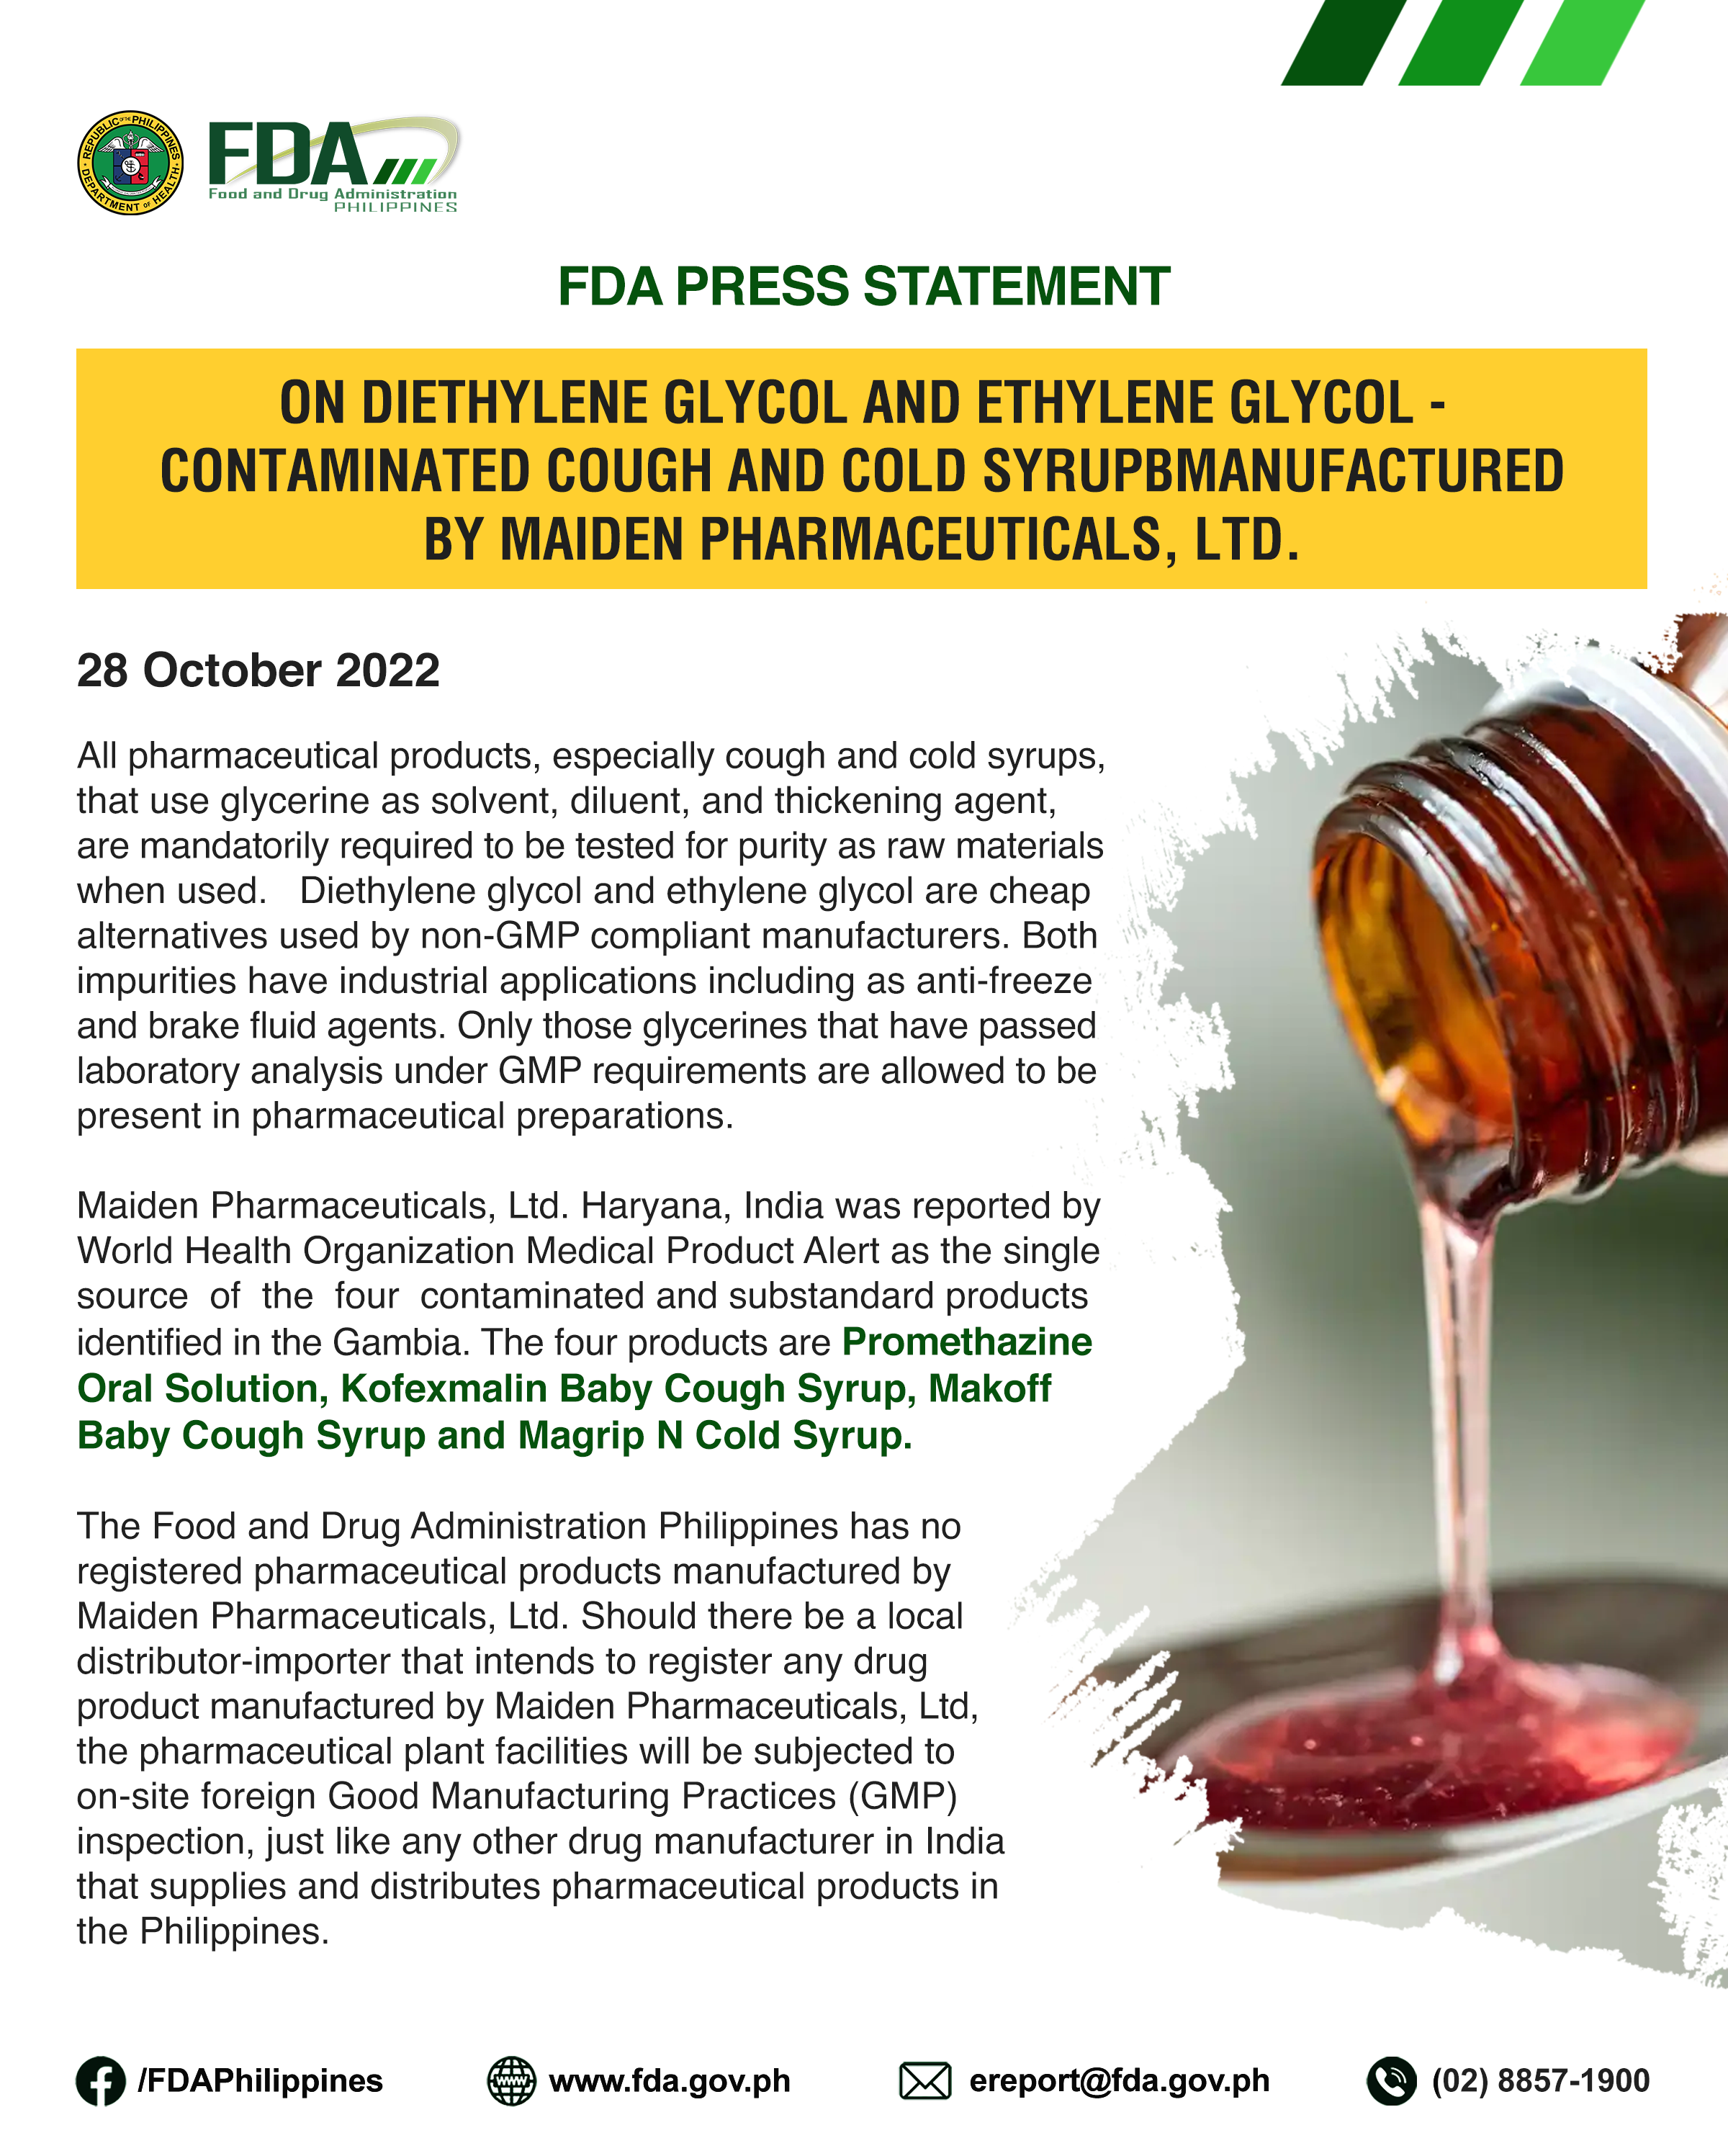 FDA STATEMENT || On Diethylene glycol and Ethylene glycol – contaminated Cough and Cold Syrup Manufactured by Maiden Pharmaceuticals, Ltd.